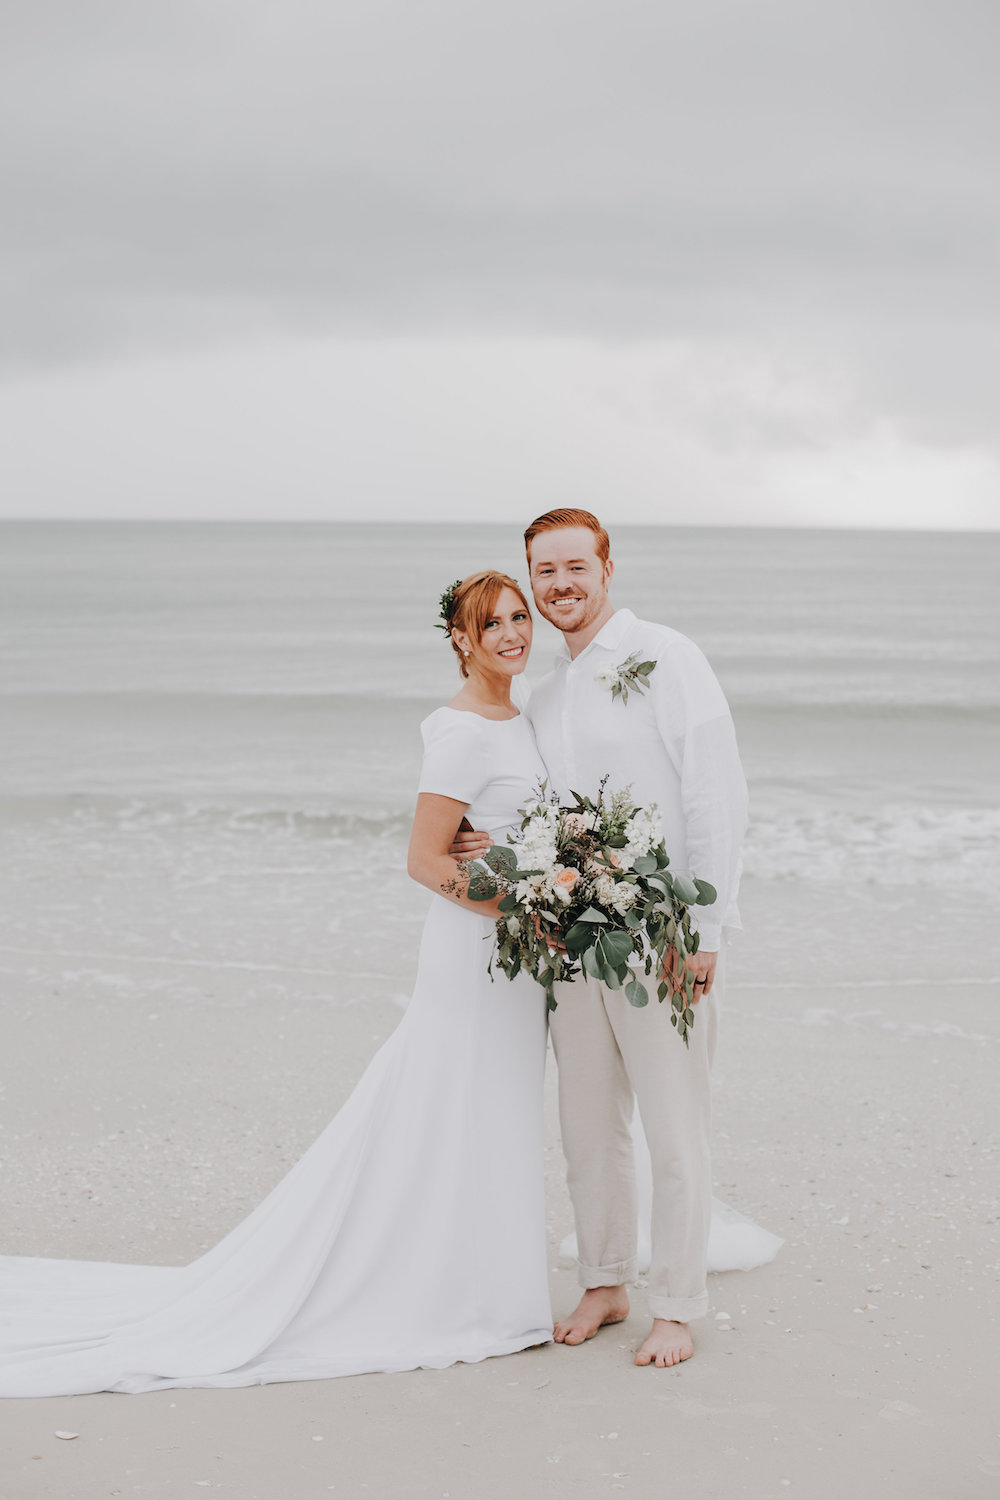 Beautiful Naples Florida Elopement With Beach Chic Details